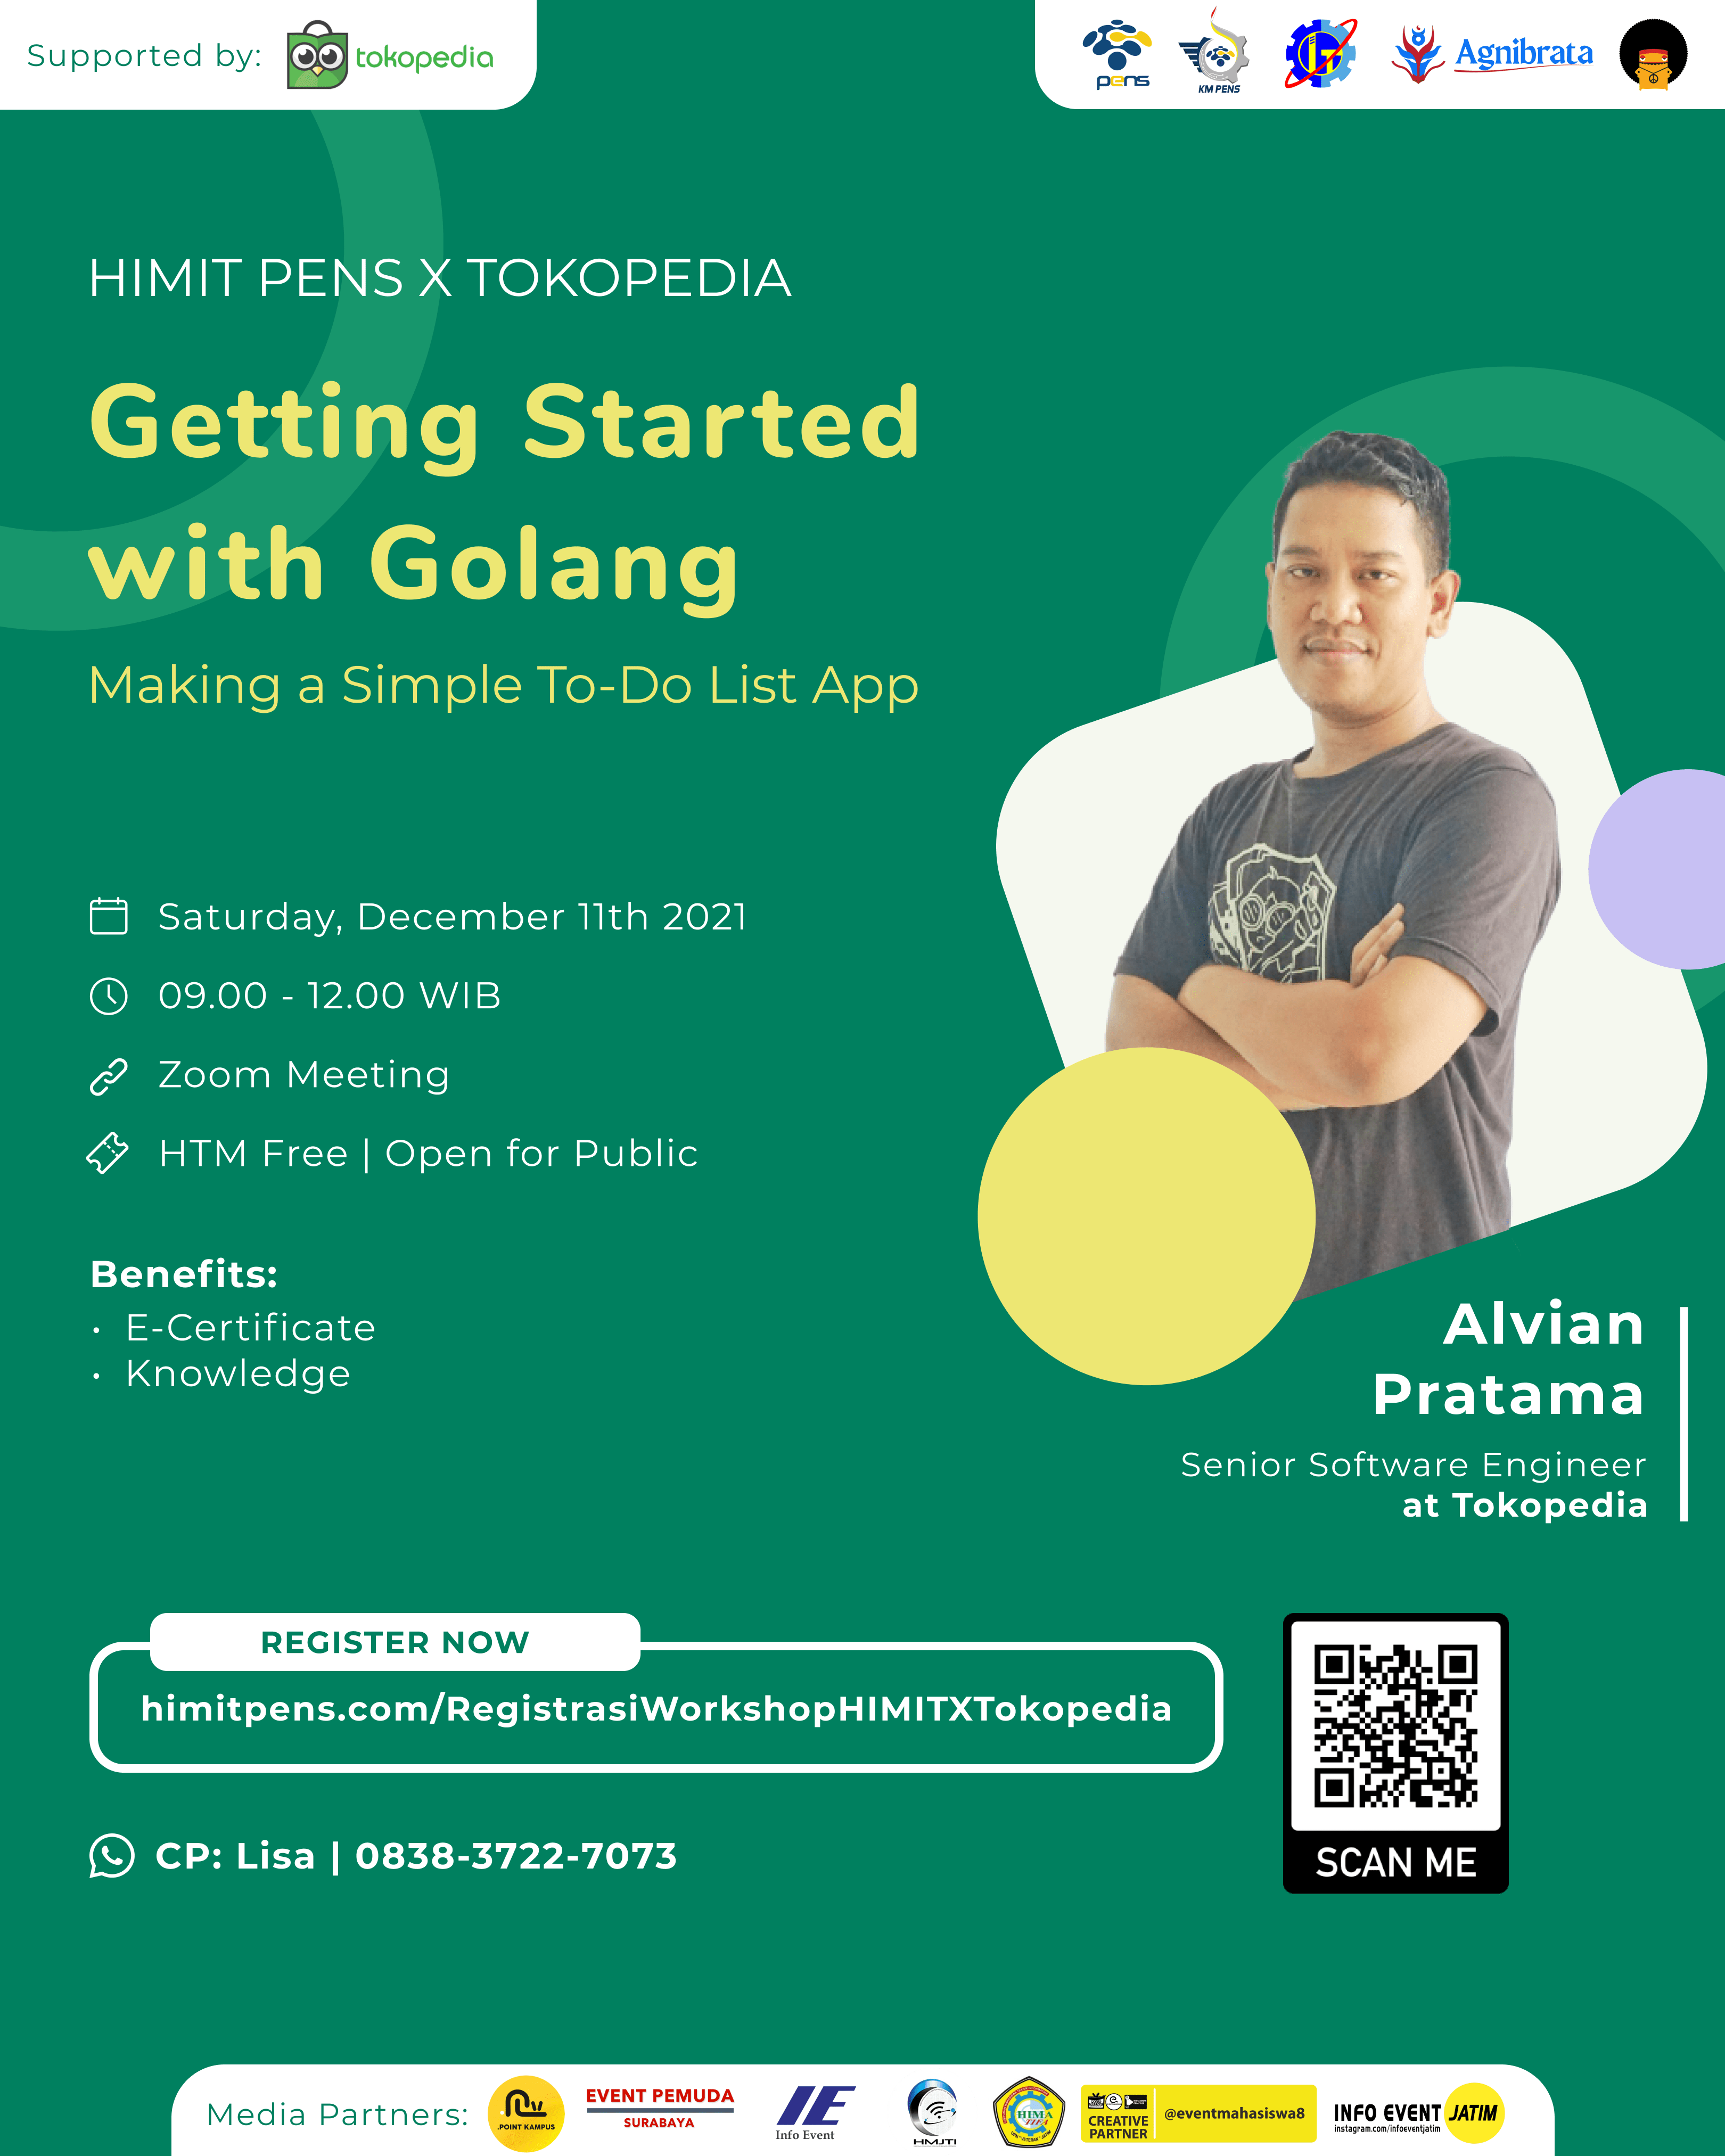 Webinar Himit PENS X TOKOPEDIA "Getting Started with Golang Making a Simple To-Do List App"